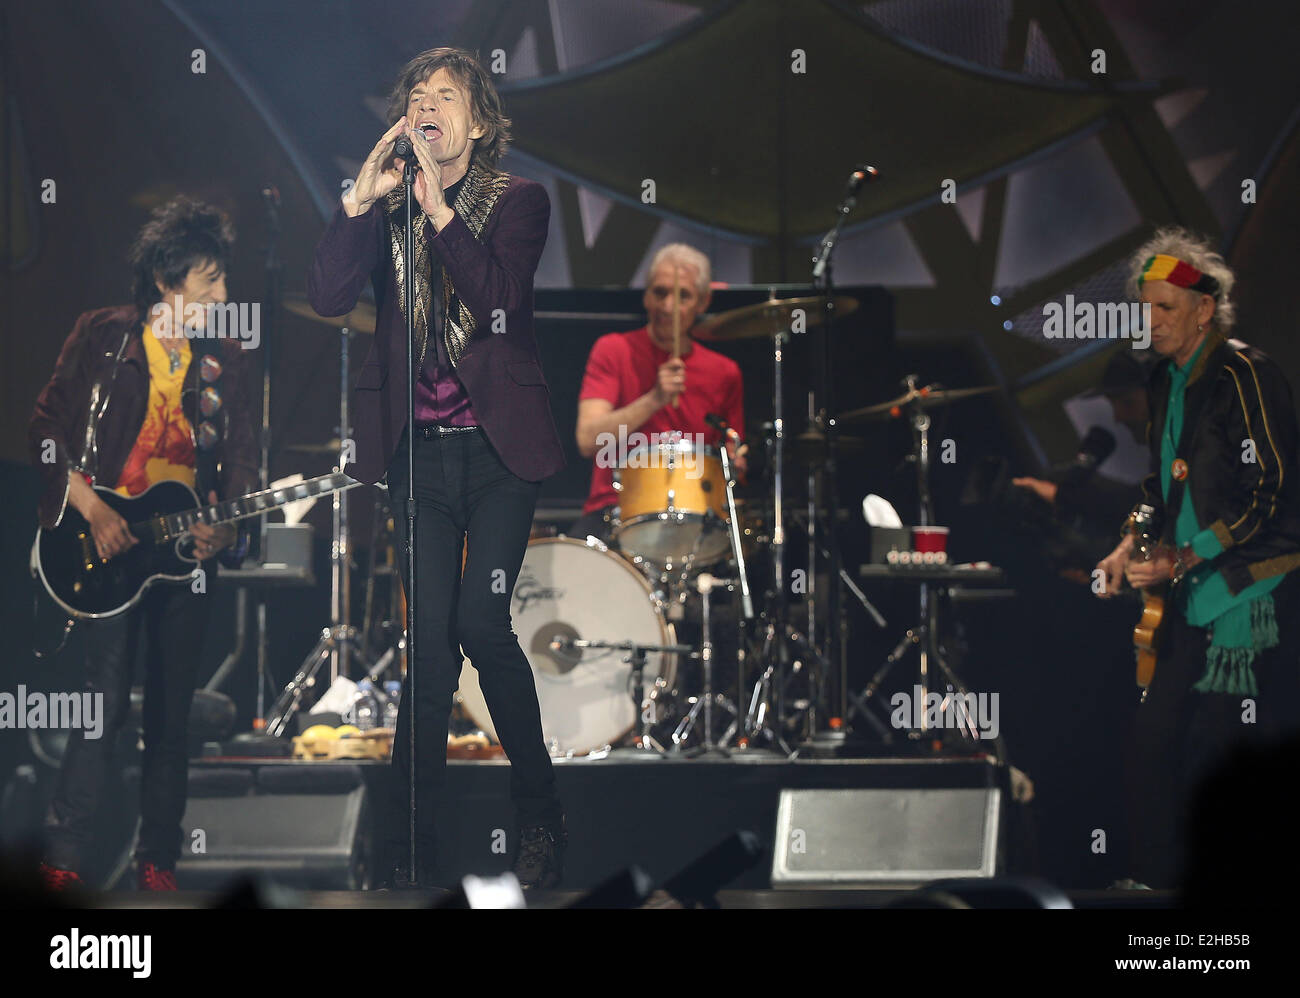 Duesseldorf, Germany. 19th June, 2014. Ron Wood (L-R), Mick Jagger, Charlie Watts and Keith Richards of rock band Rolling Stones performs on stage during a concert in Duesseldorf, Germany, 19 June 2014. Photo: Oliver Berg/dpa/Alamy Live News Stock Photo